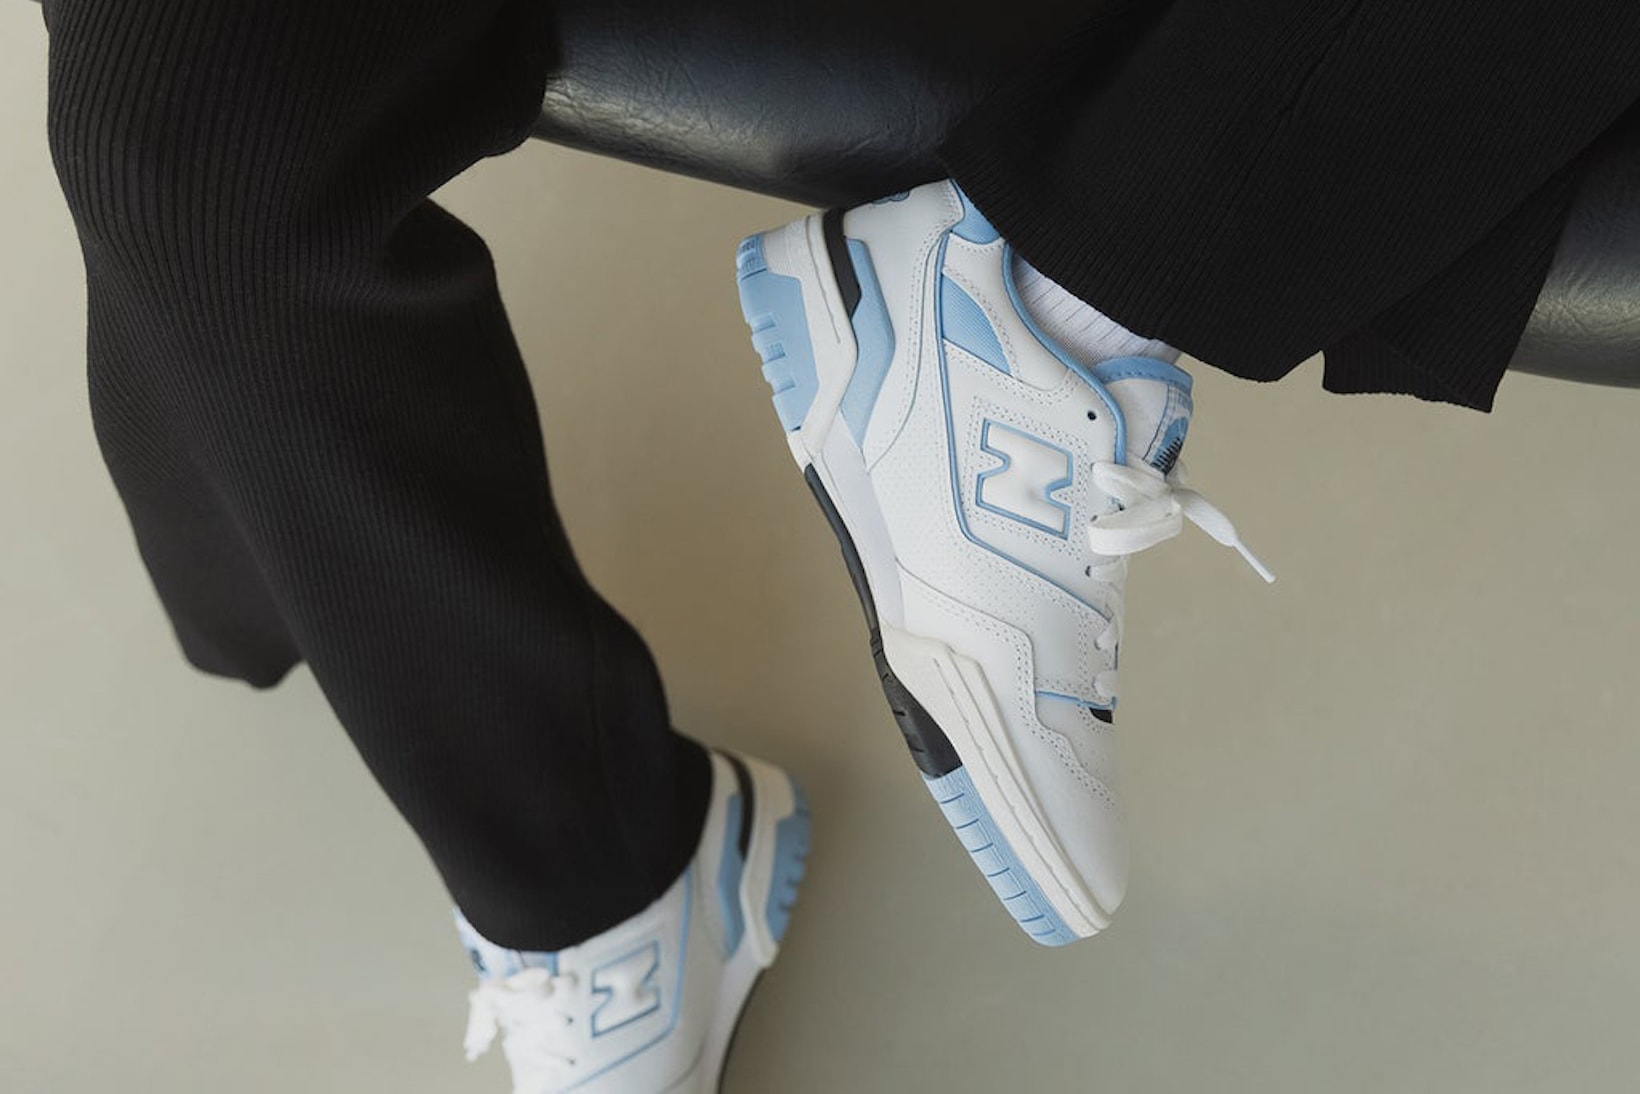 New Balance 550 UNC Baby Blue White Sneakers Footwear Kicks Shoes